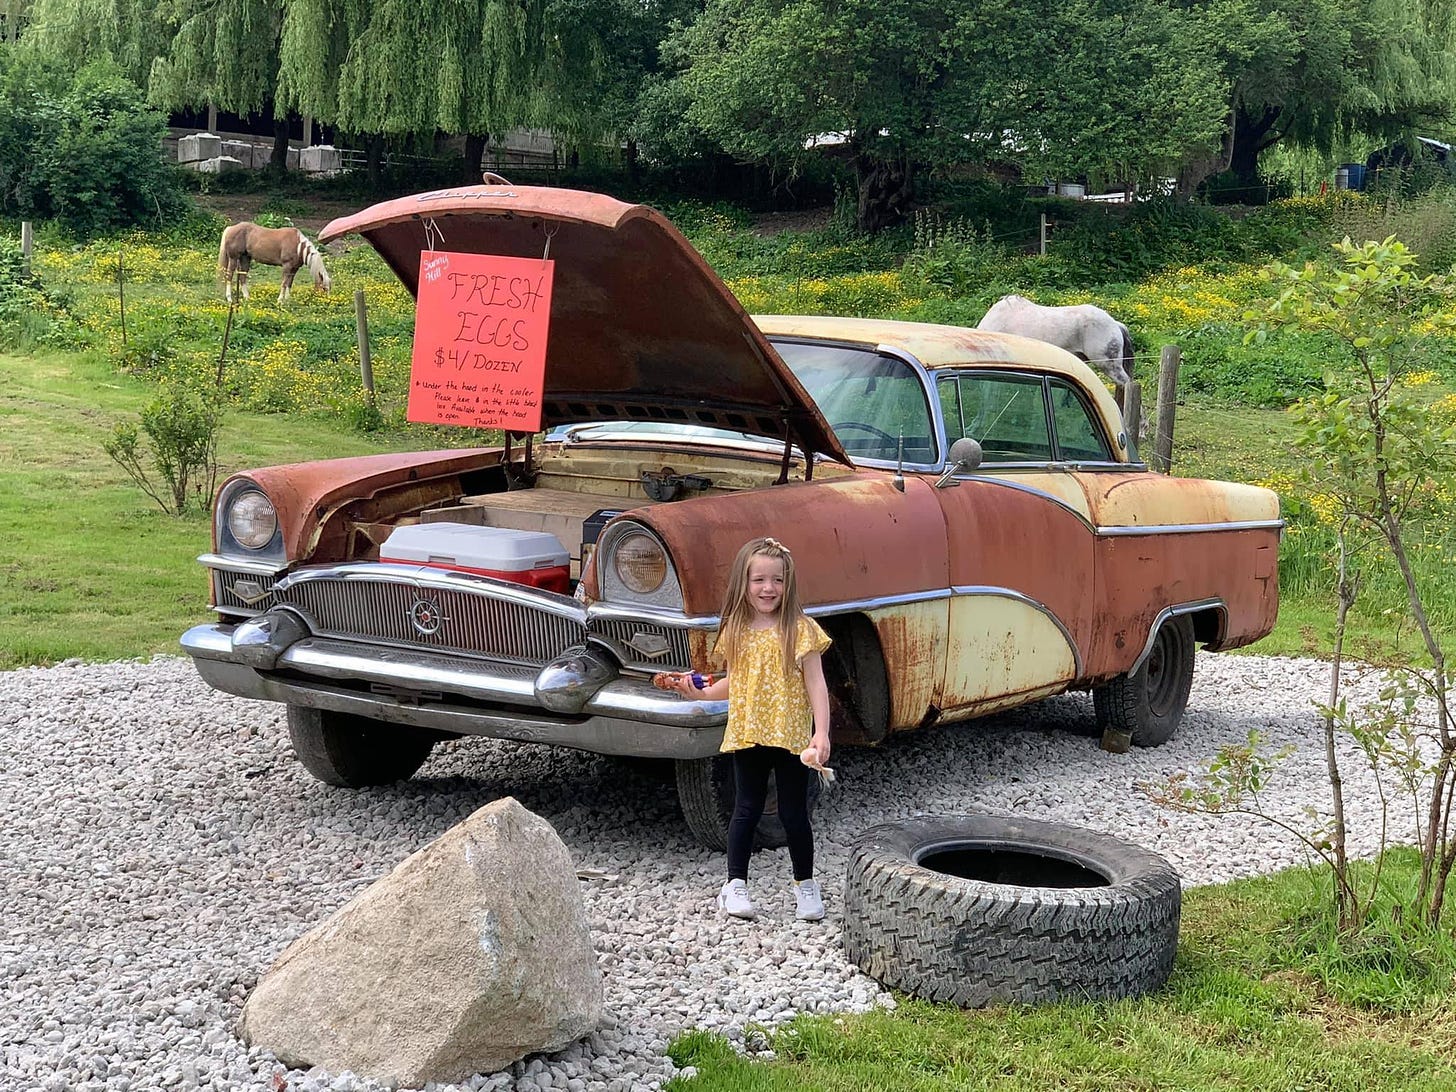 Girl standing in front of old car that serves as a farm stand